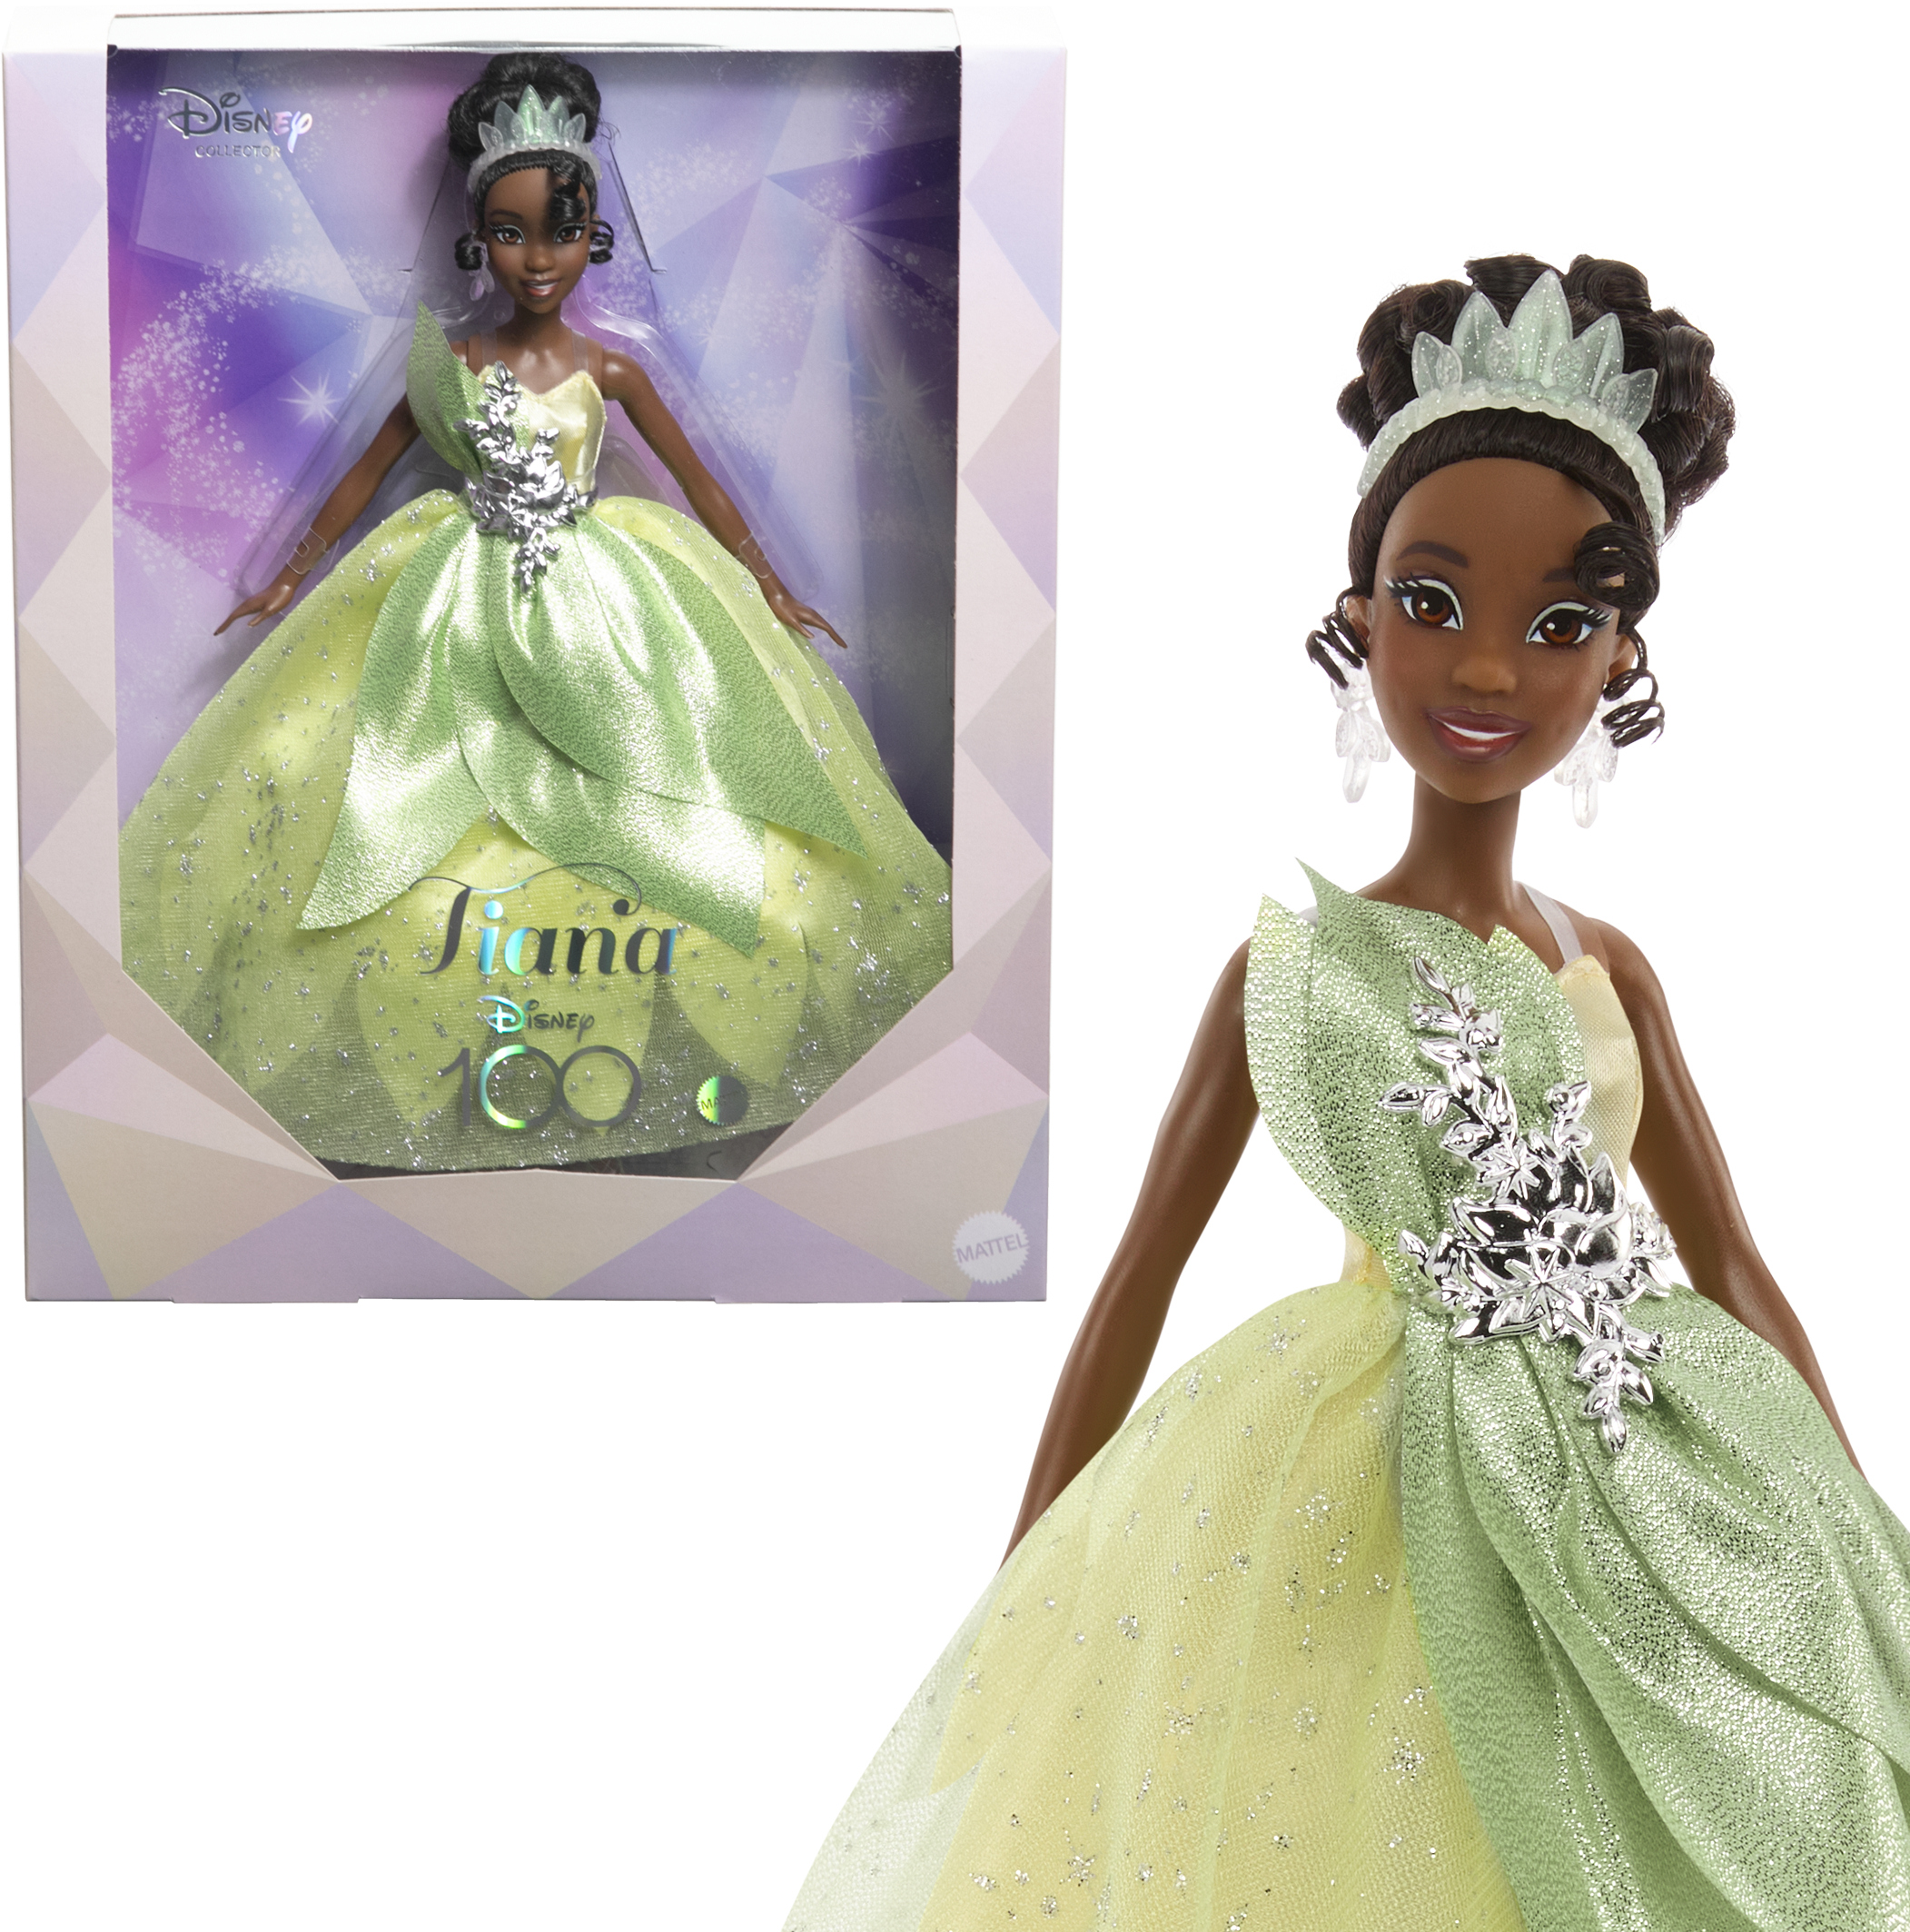 Disney Toys, Disney100 Collector Tiana Doll, Gifts for Kids and Collectors - image 1 of 6